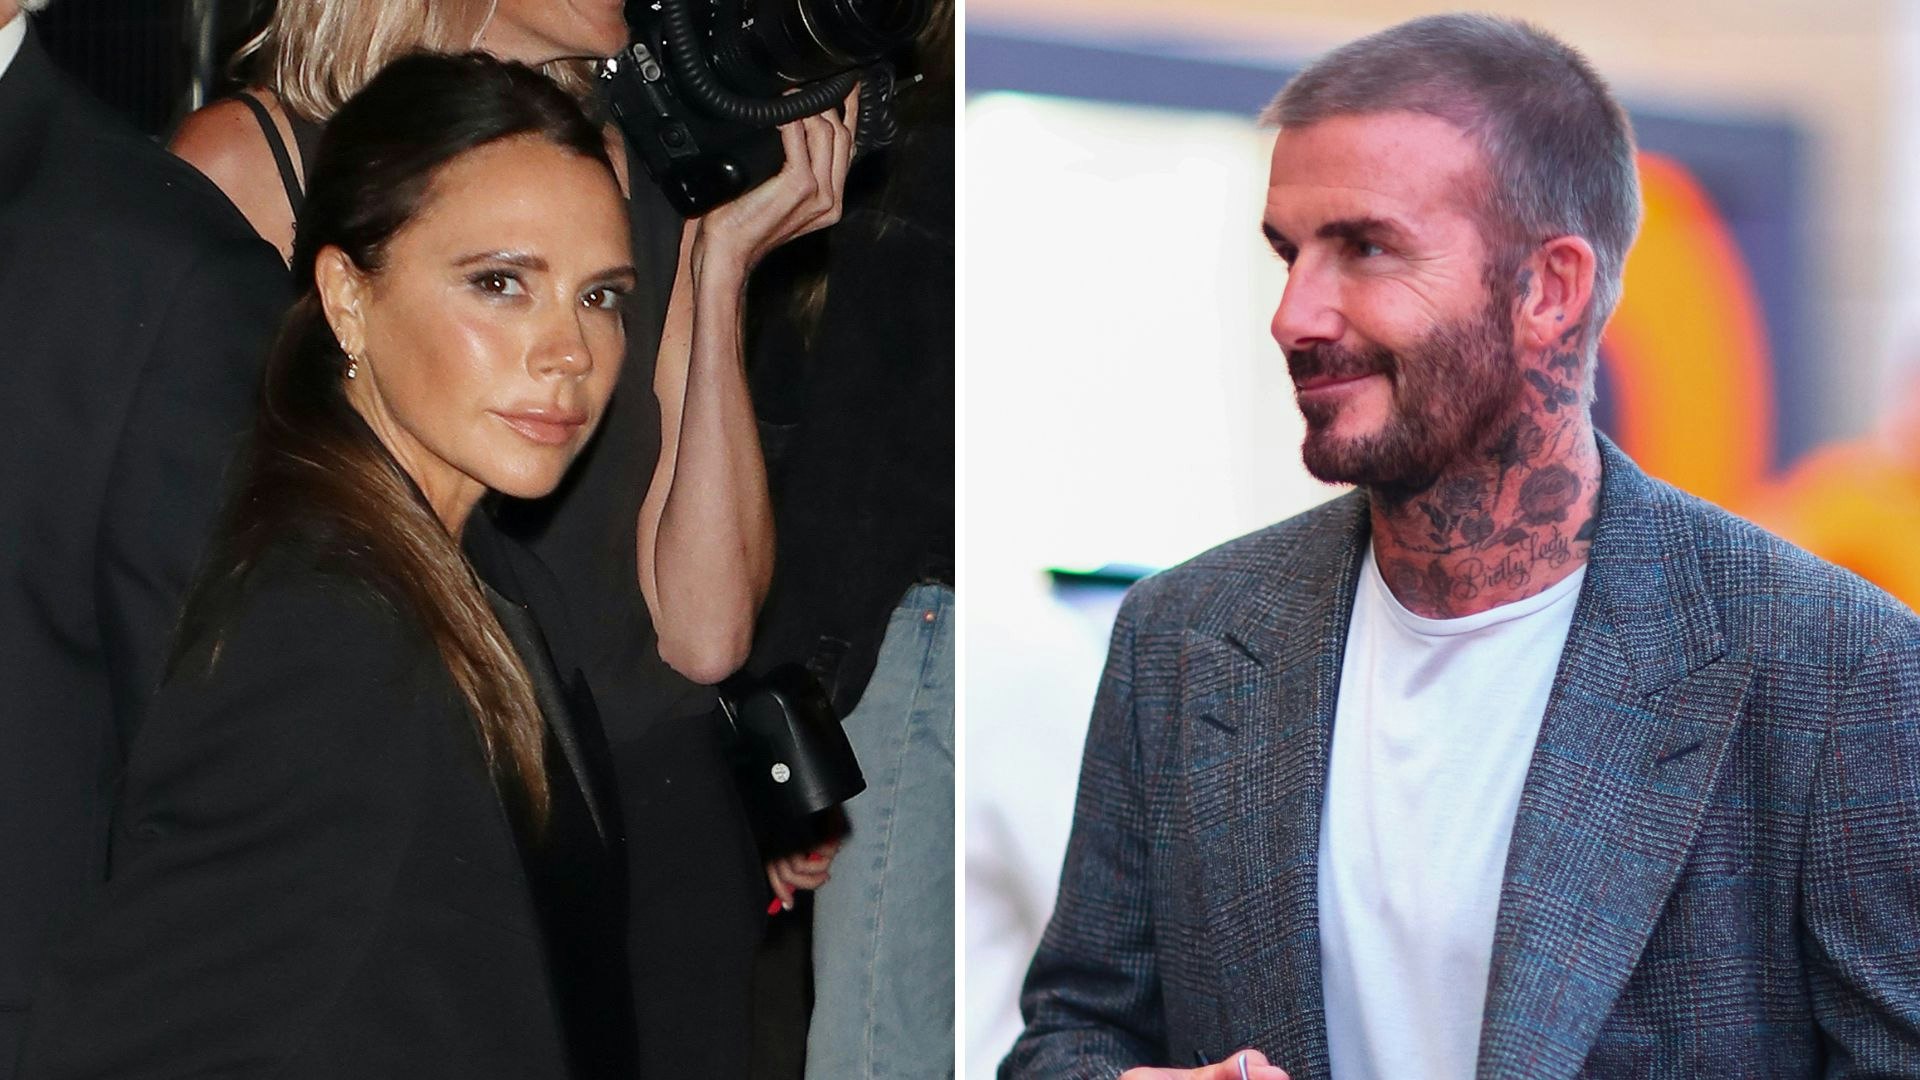 Victoria Beckham: 'It's my turn to tell all'